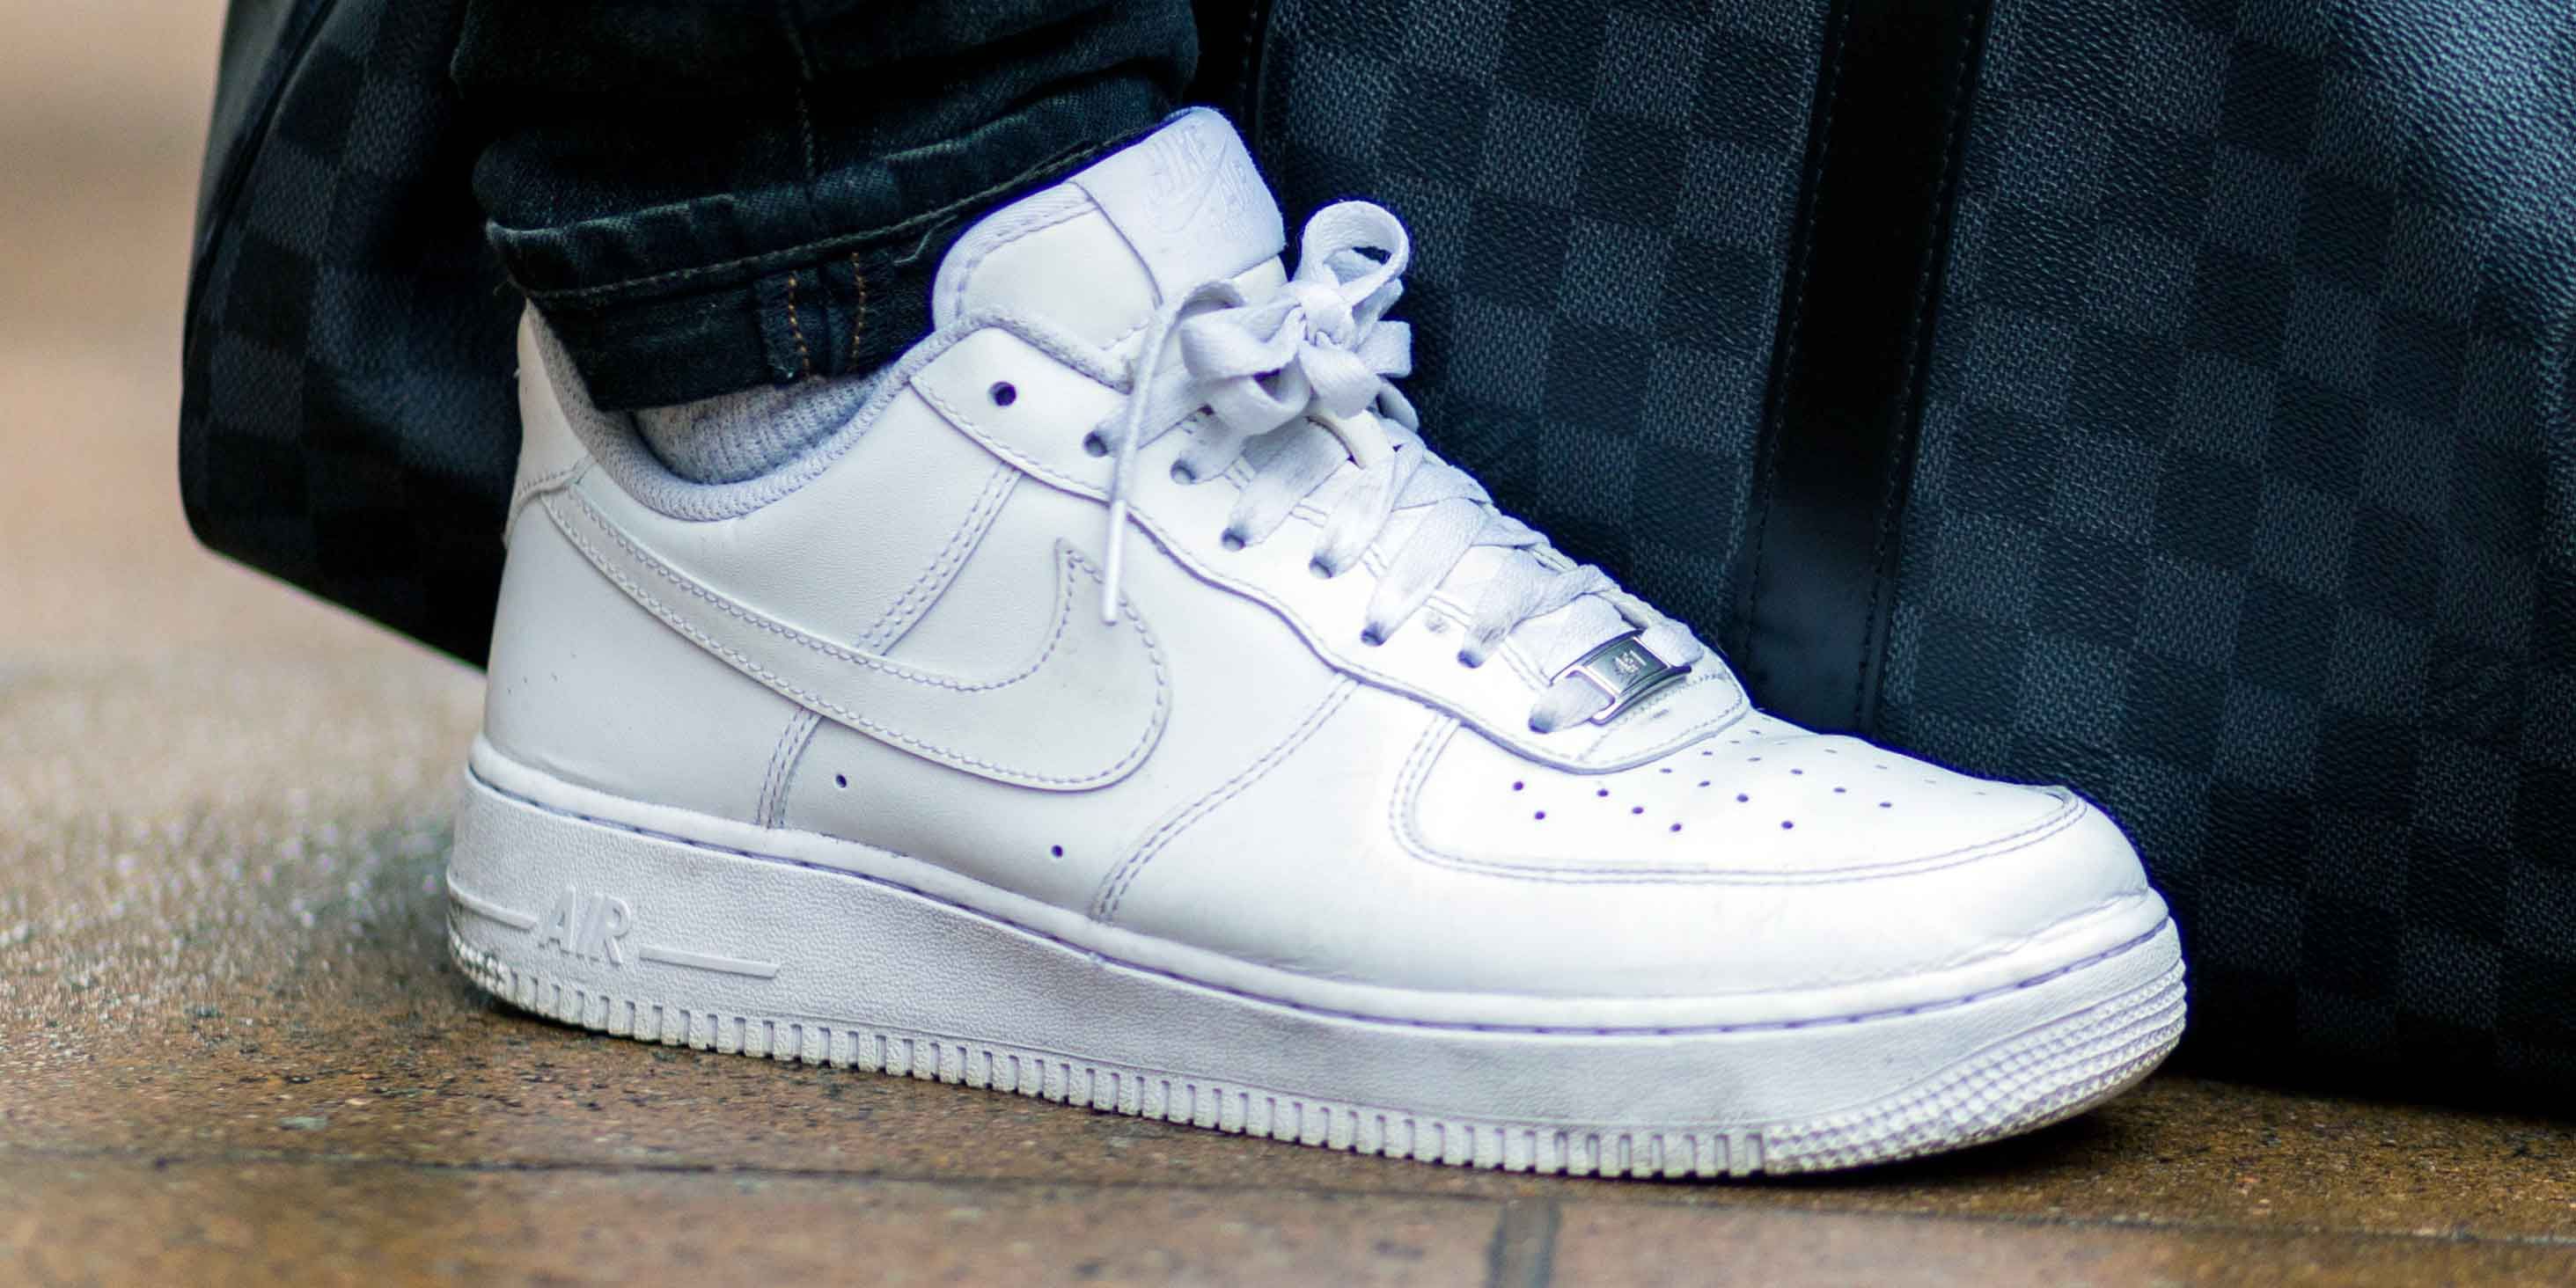 Off-White x Nike Air Force 1 Low  White air force 1 outfit men, Sneakers  men fashion, Air force 1 outfit men